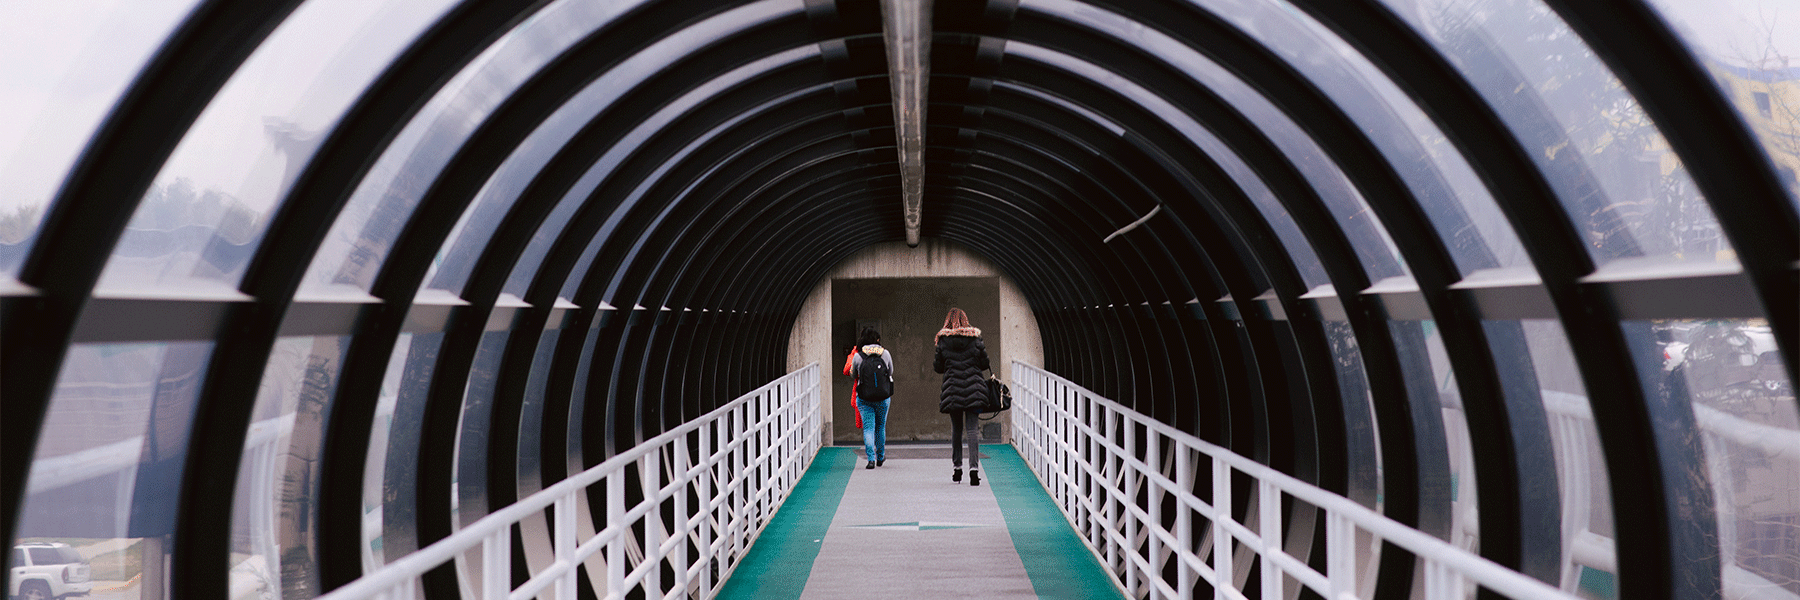 Students walking down the tunnels in winter time. 